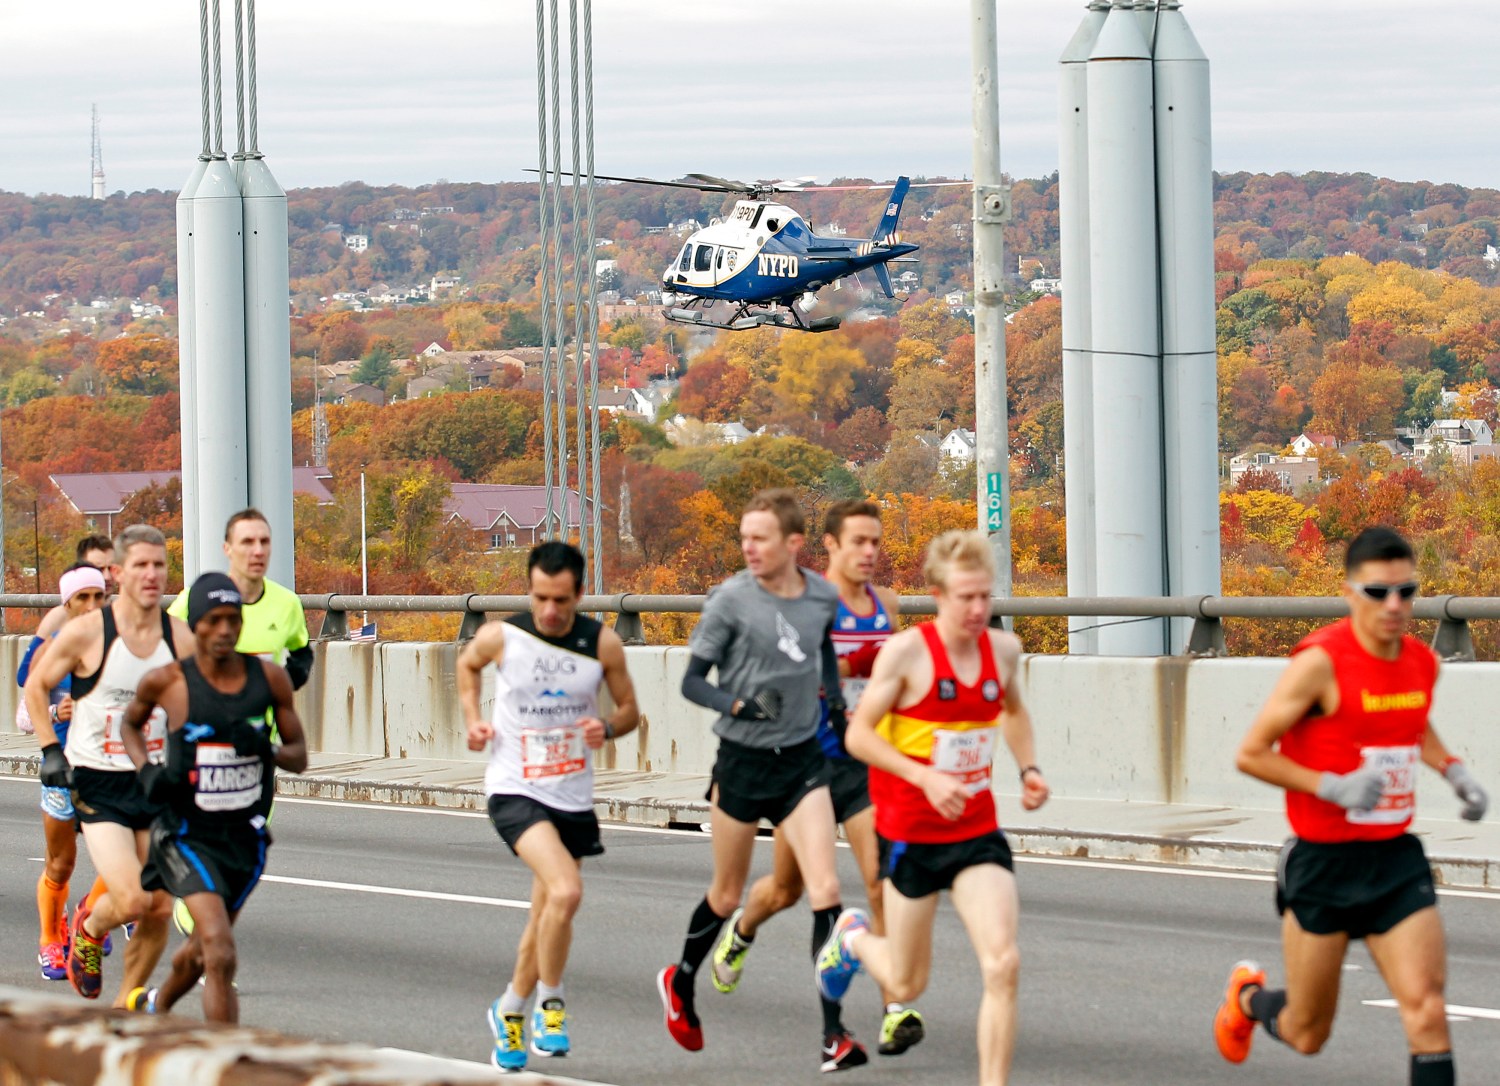 A New York Police Department helicopter watches over runners at the start of the New York City Marathon in New York, November 3, 2013. REUTERS/Adam Hunger